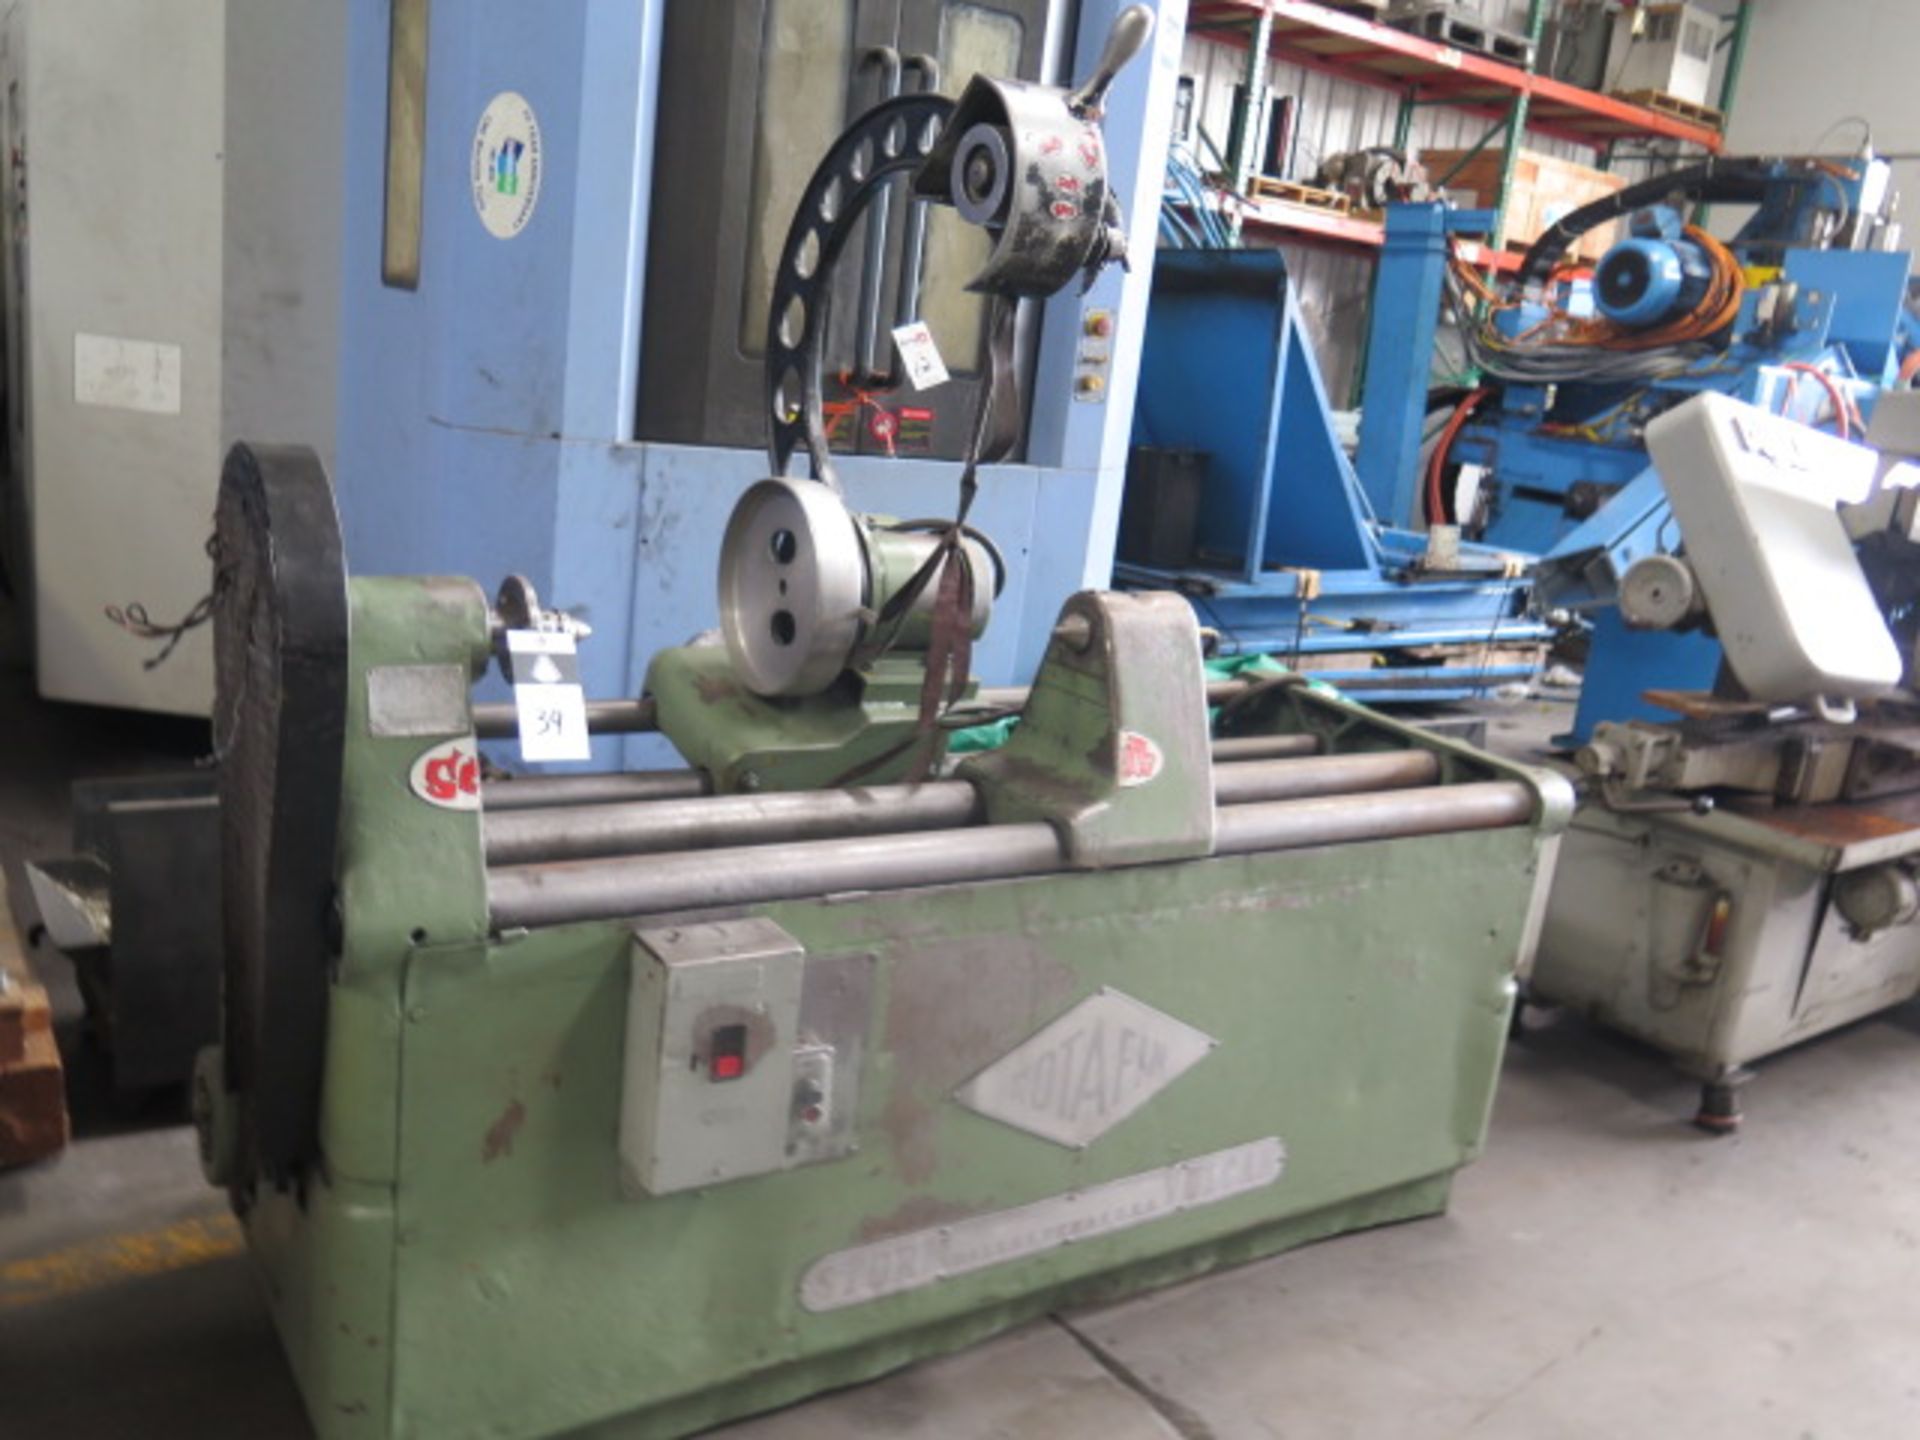 Storm-Vulcan mdl. 135 Crank Shaft Finishing Machine s/n 50-187 (SOLD AS-IS - NO WARRANTY) - Image 3 of 11